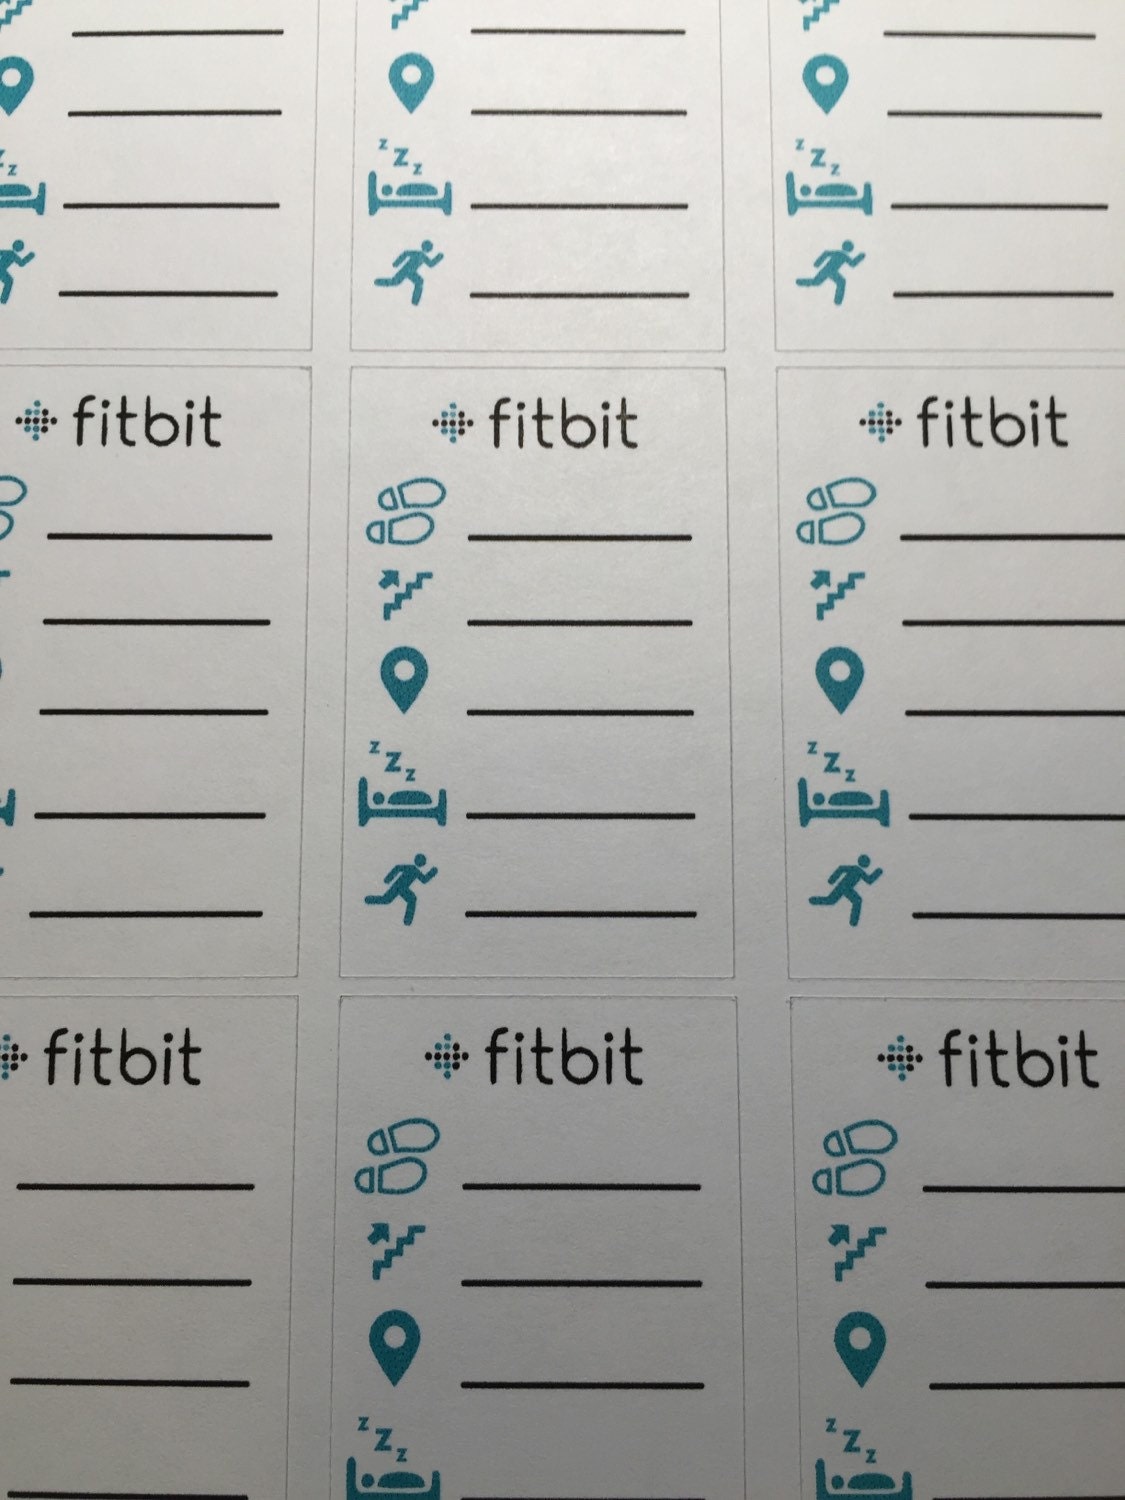 fitbit-tracker-planner-stickers-for-sidebar-set-of-21